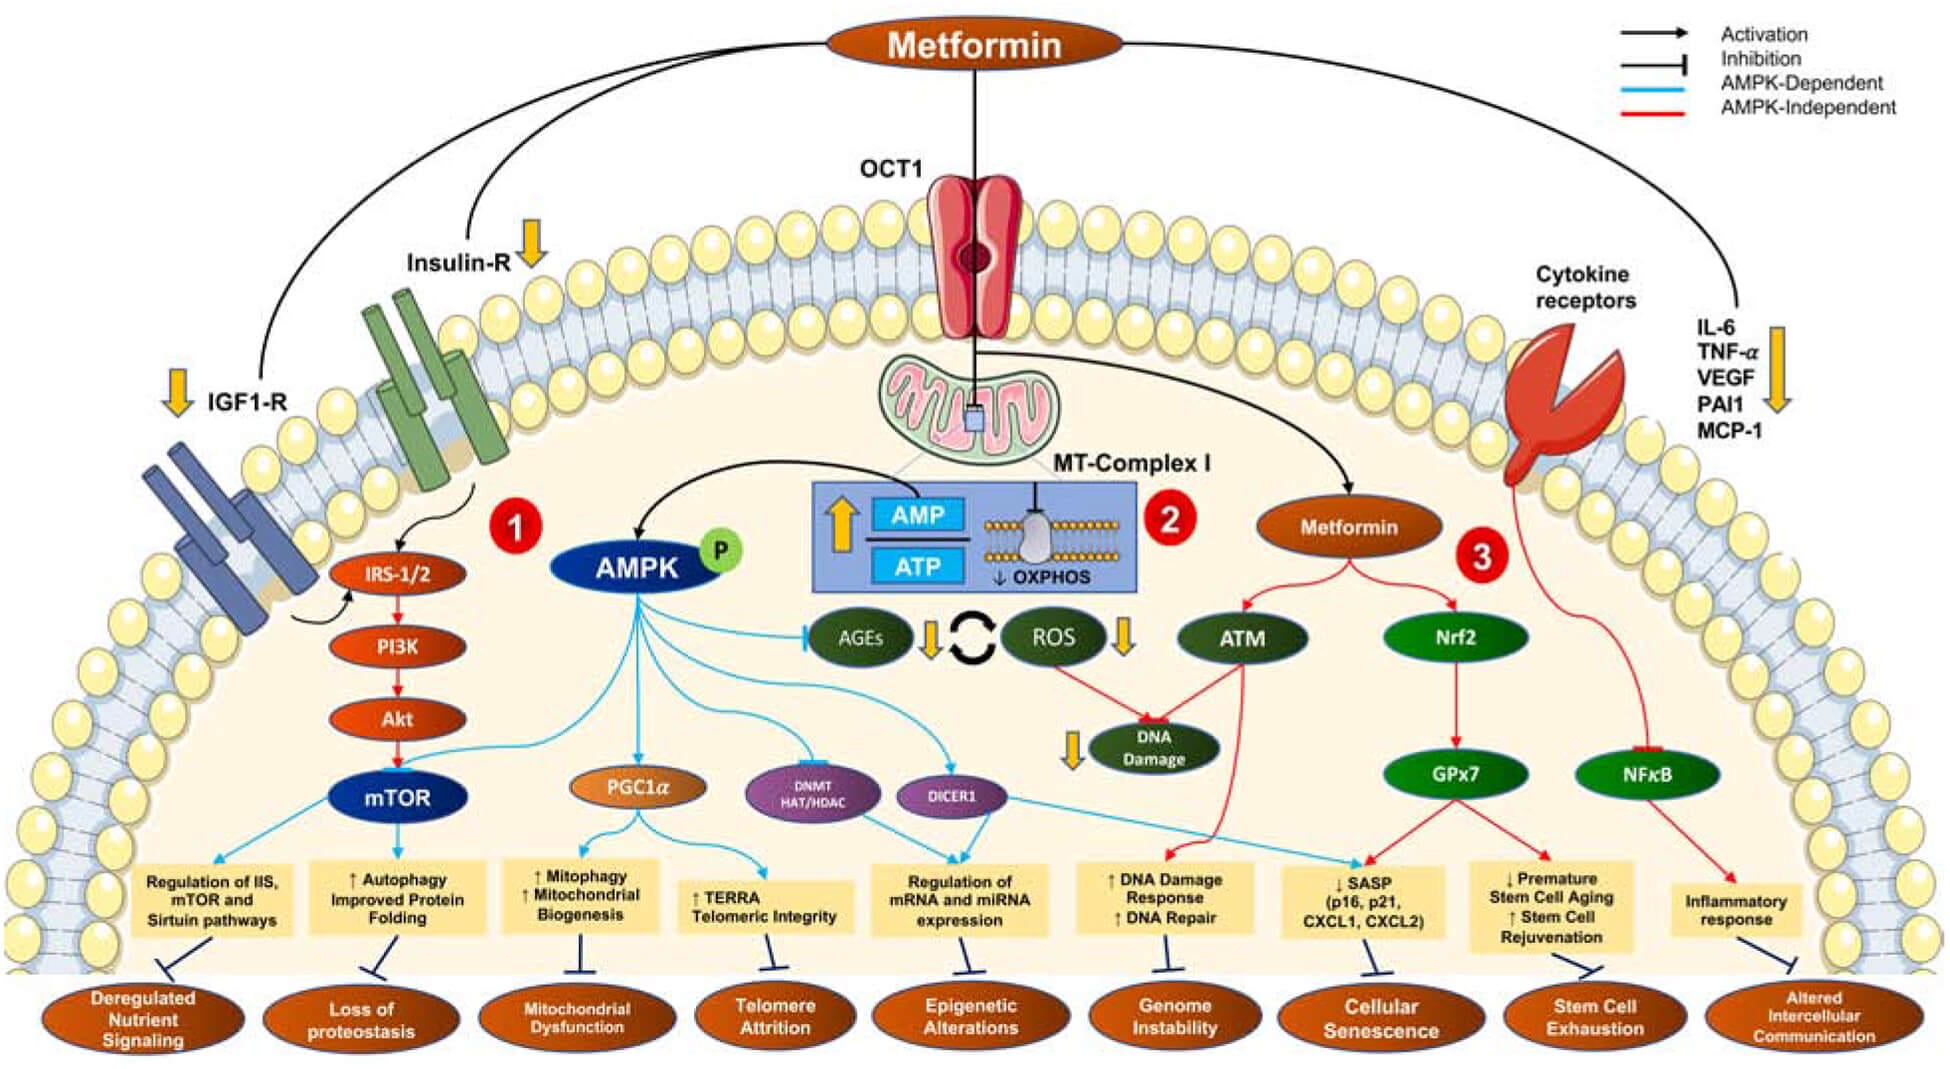 How metformin influences age-related processes in the body.